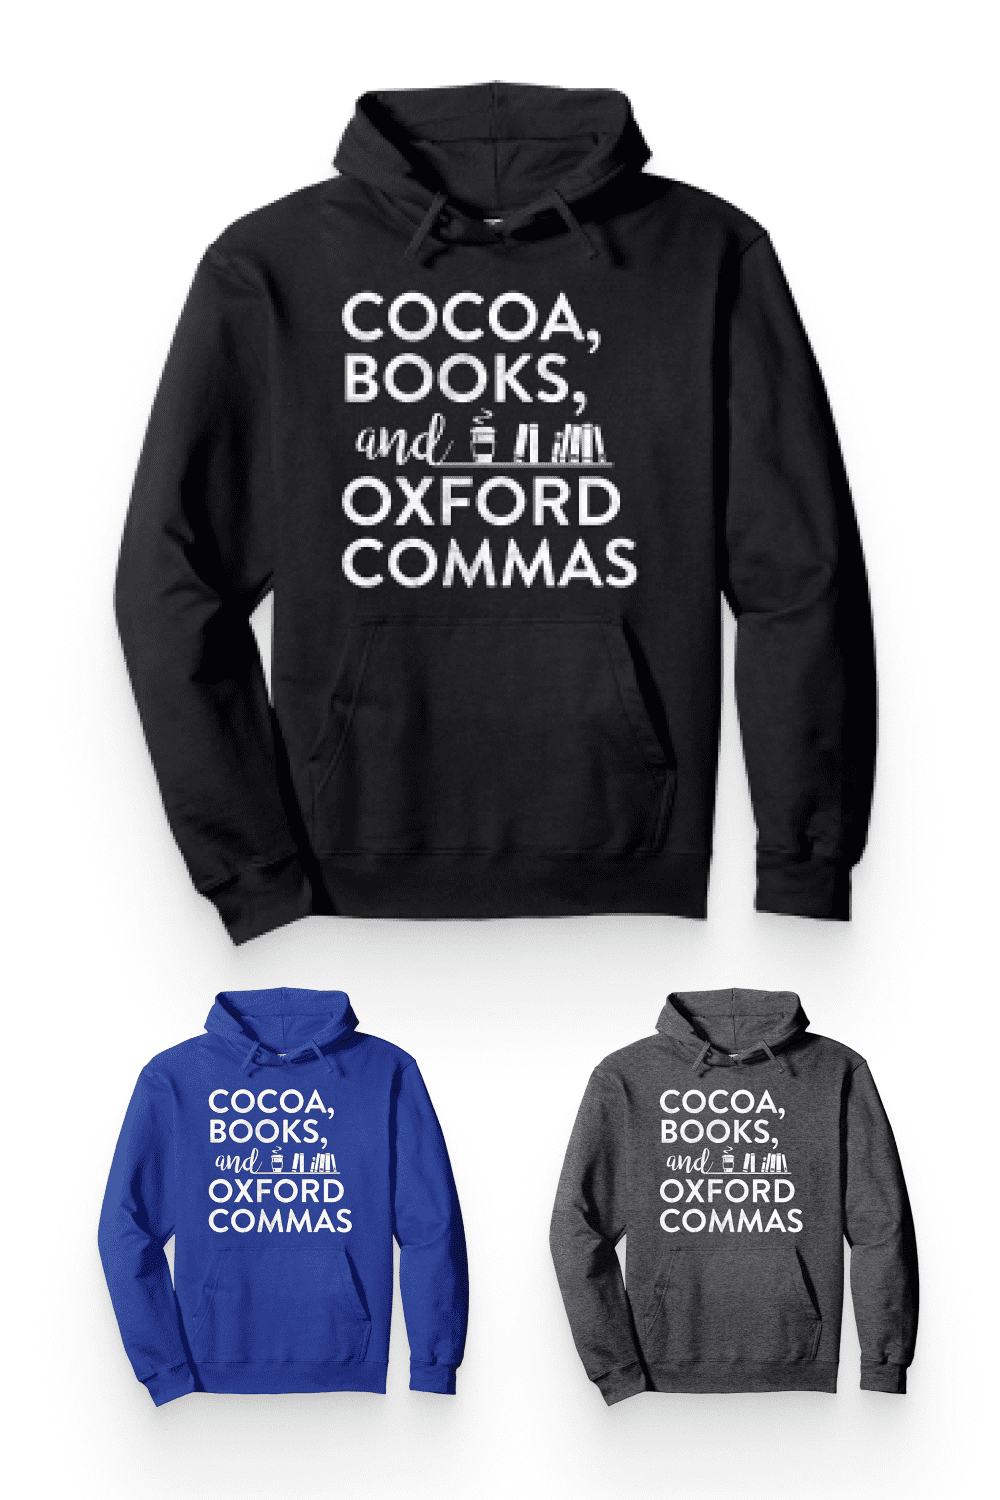 Hoodie with text Cocoa Books Oxford Comma.